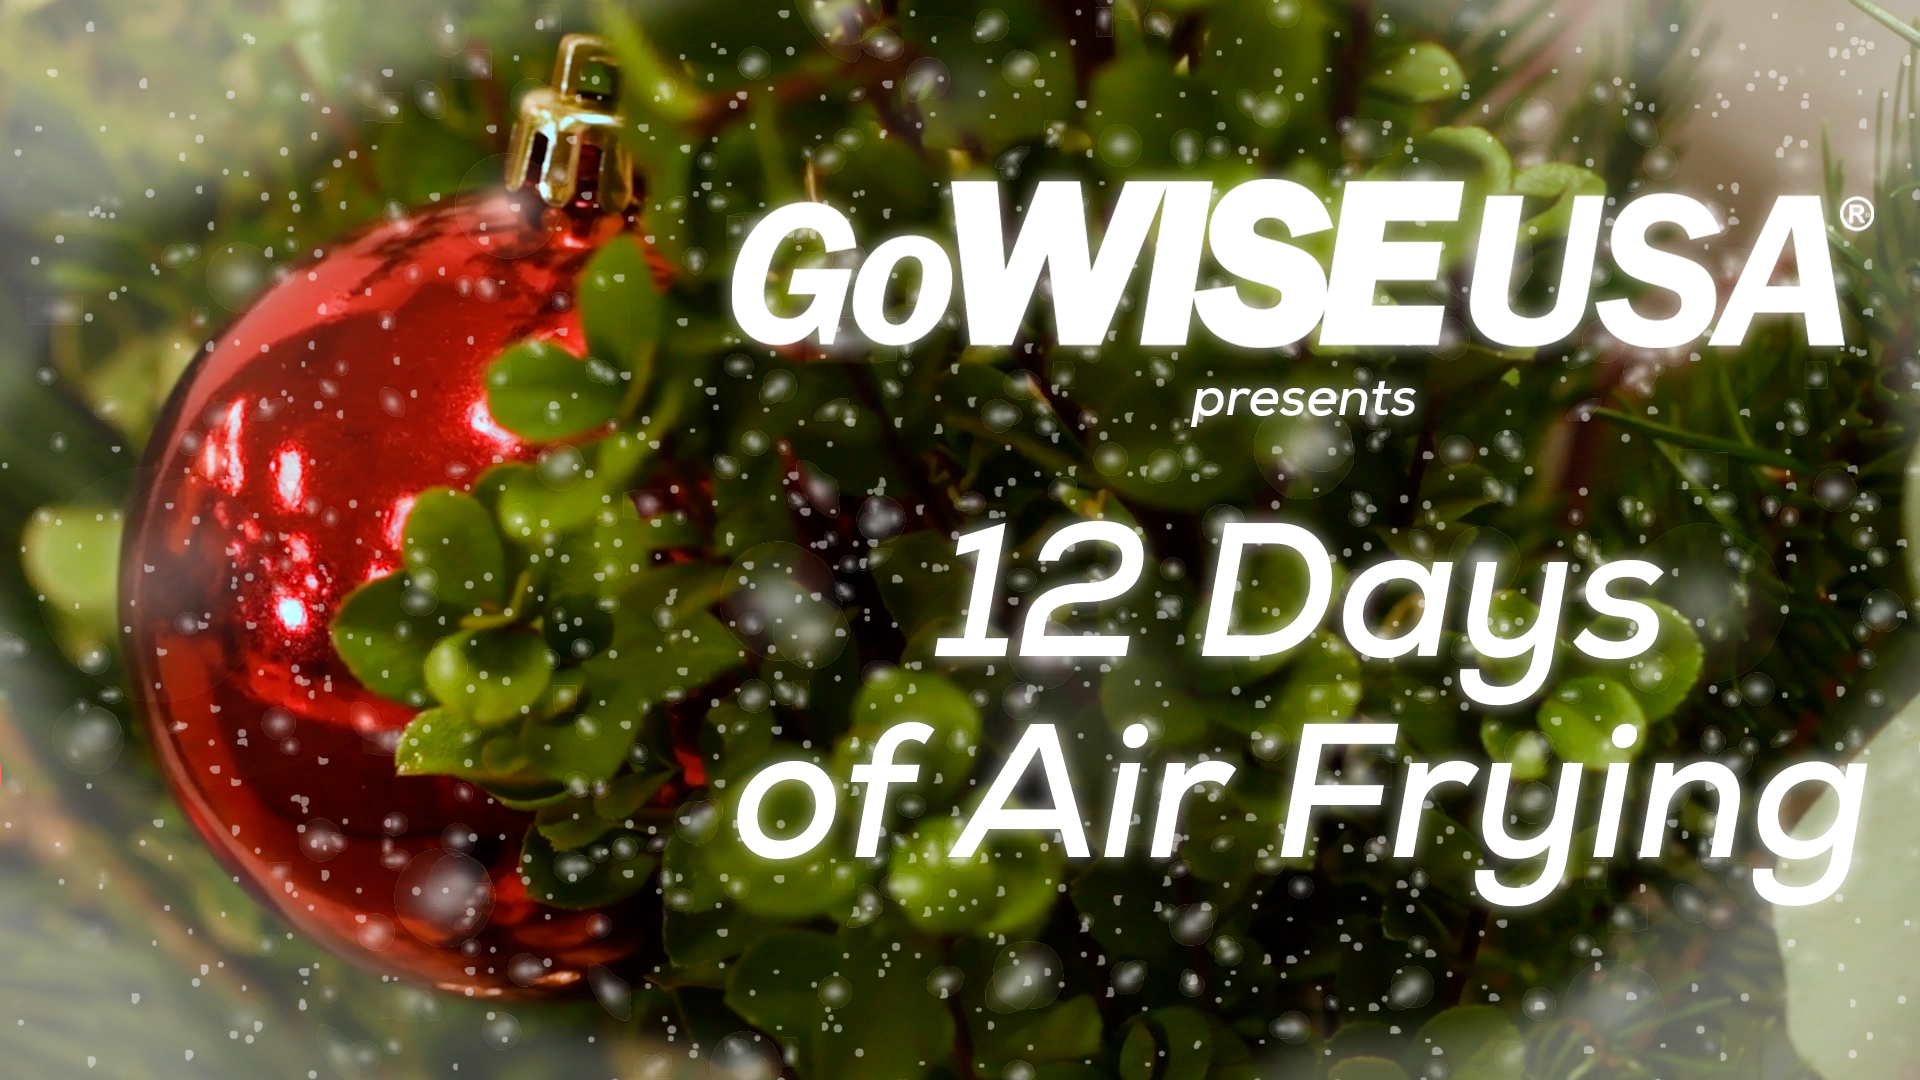 12 Days of Air-Frying!